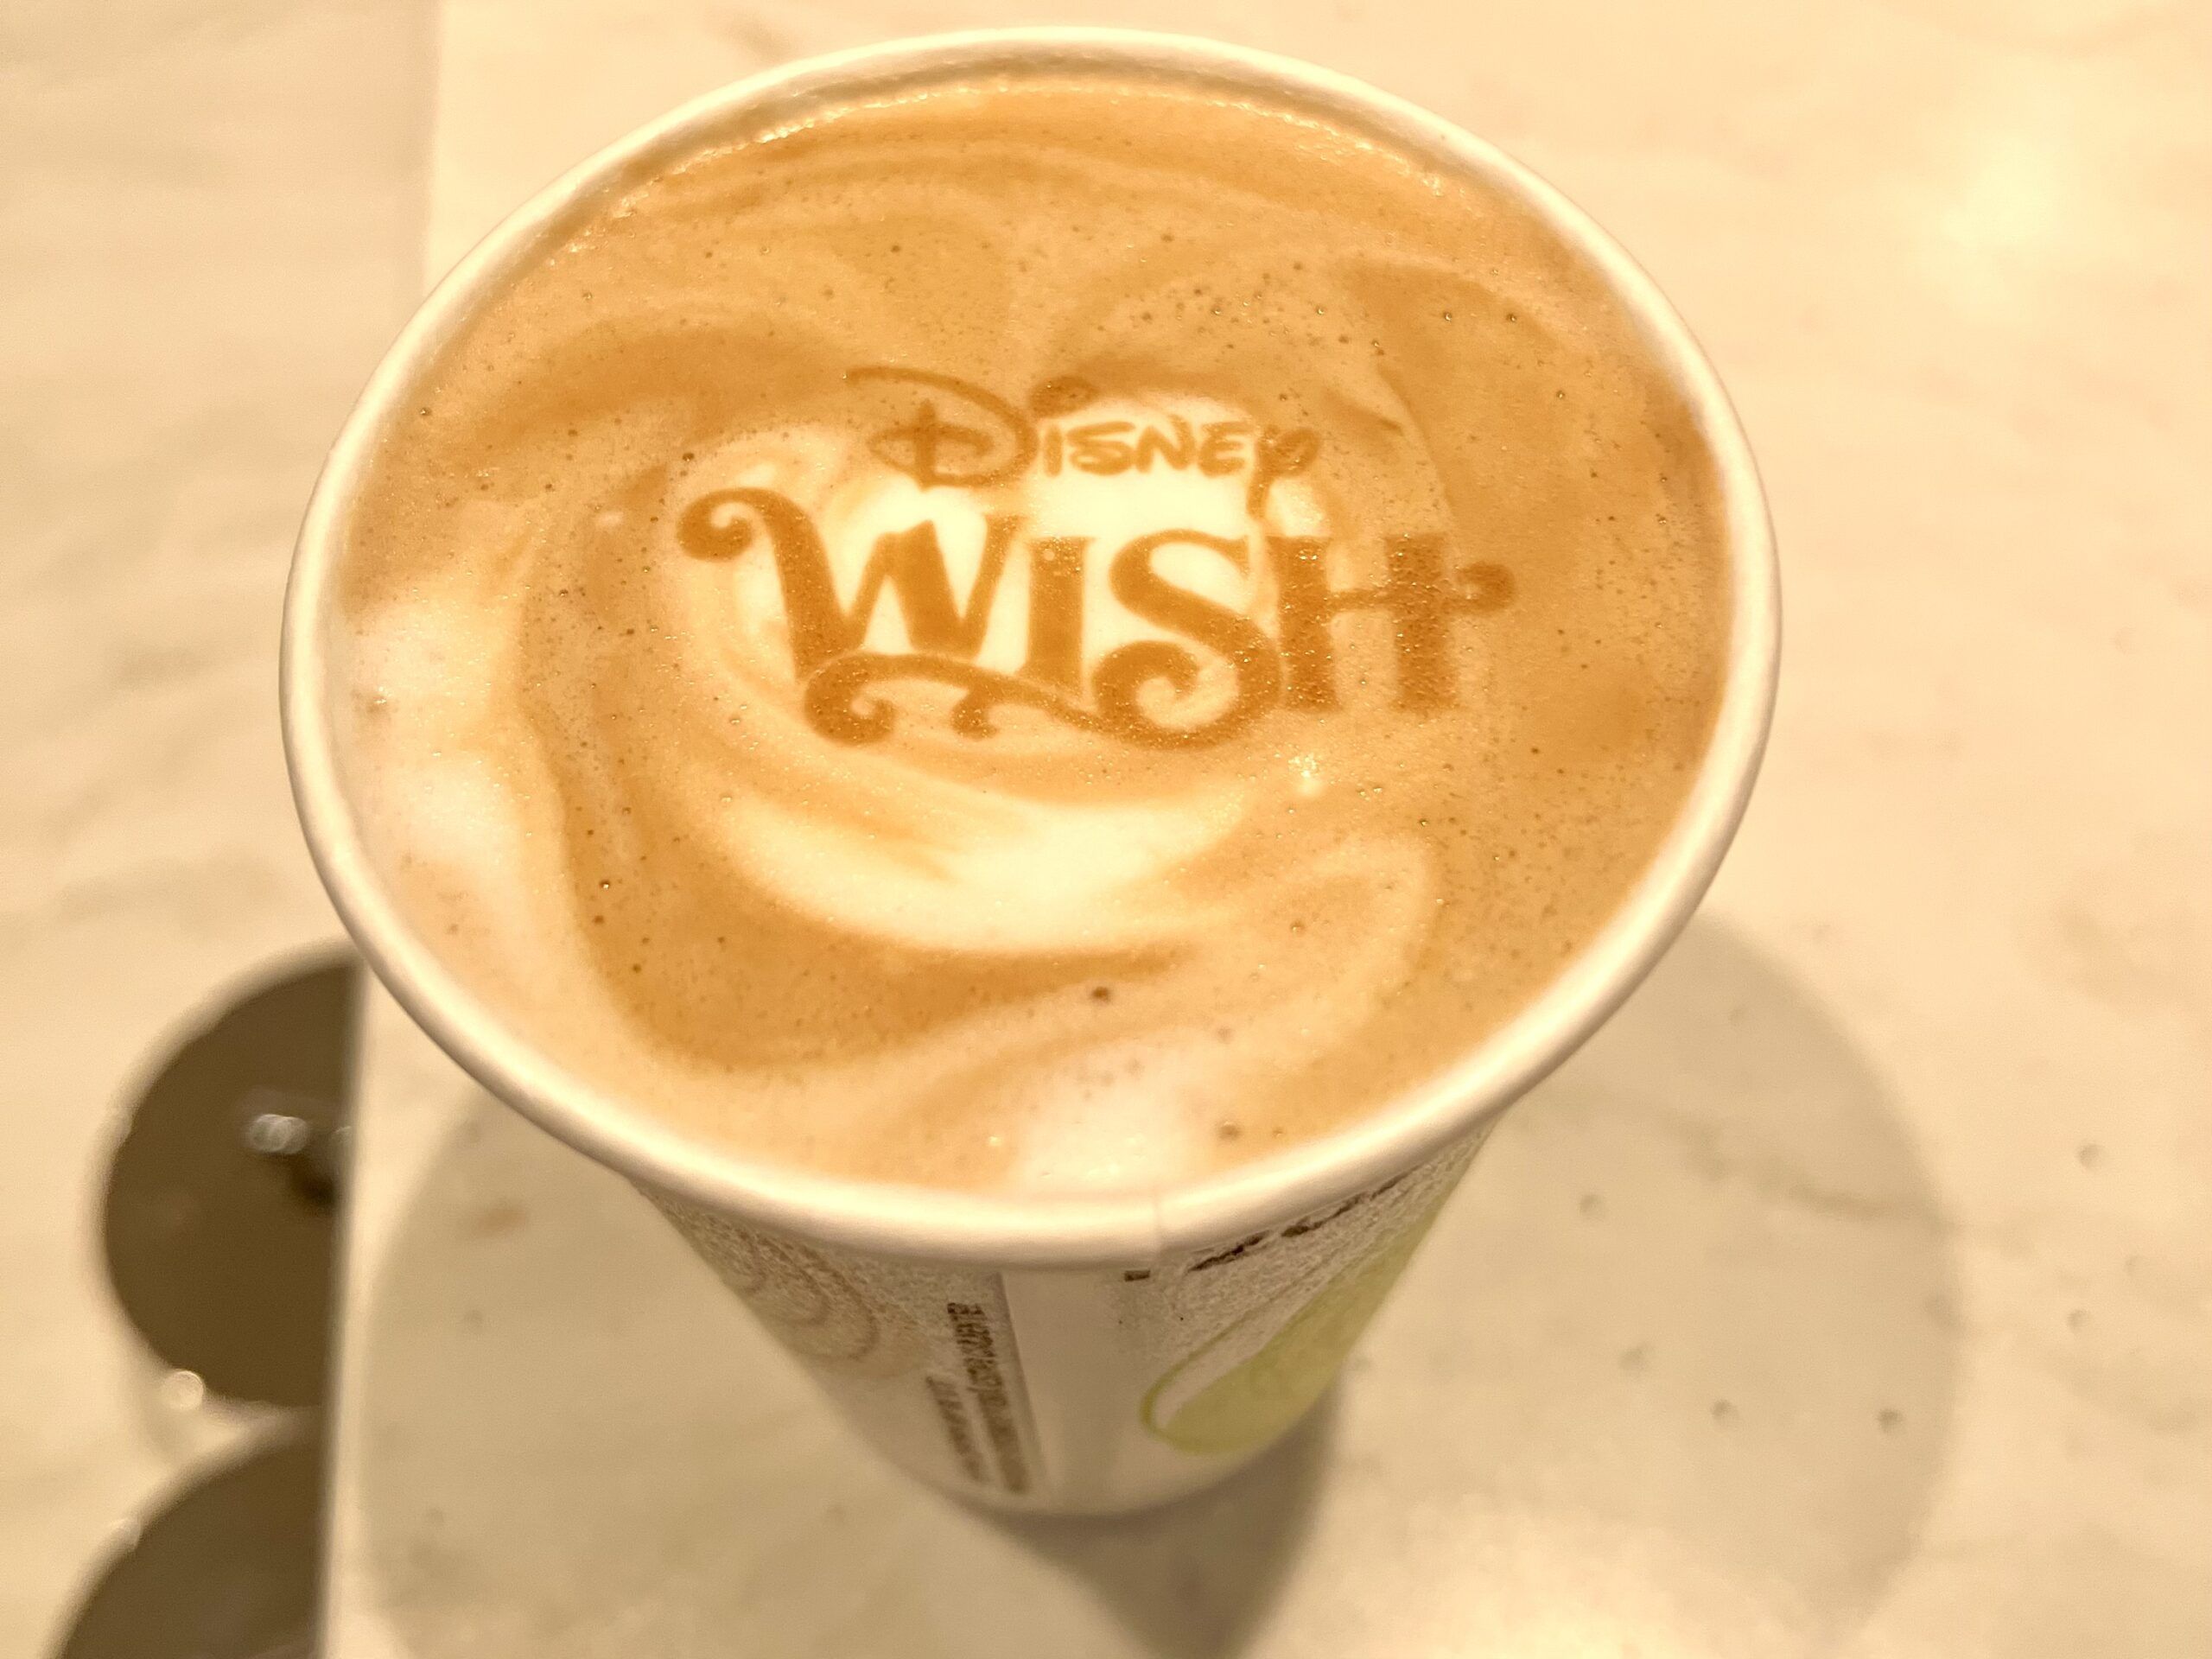 Top Activities for Adults on Disney Wish